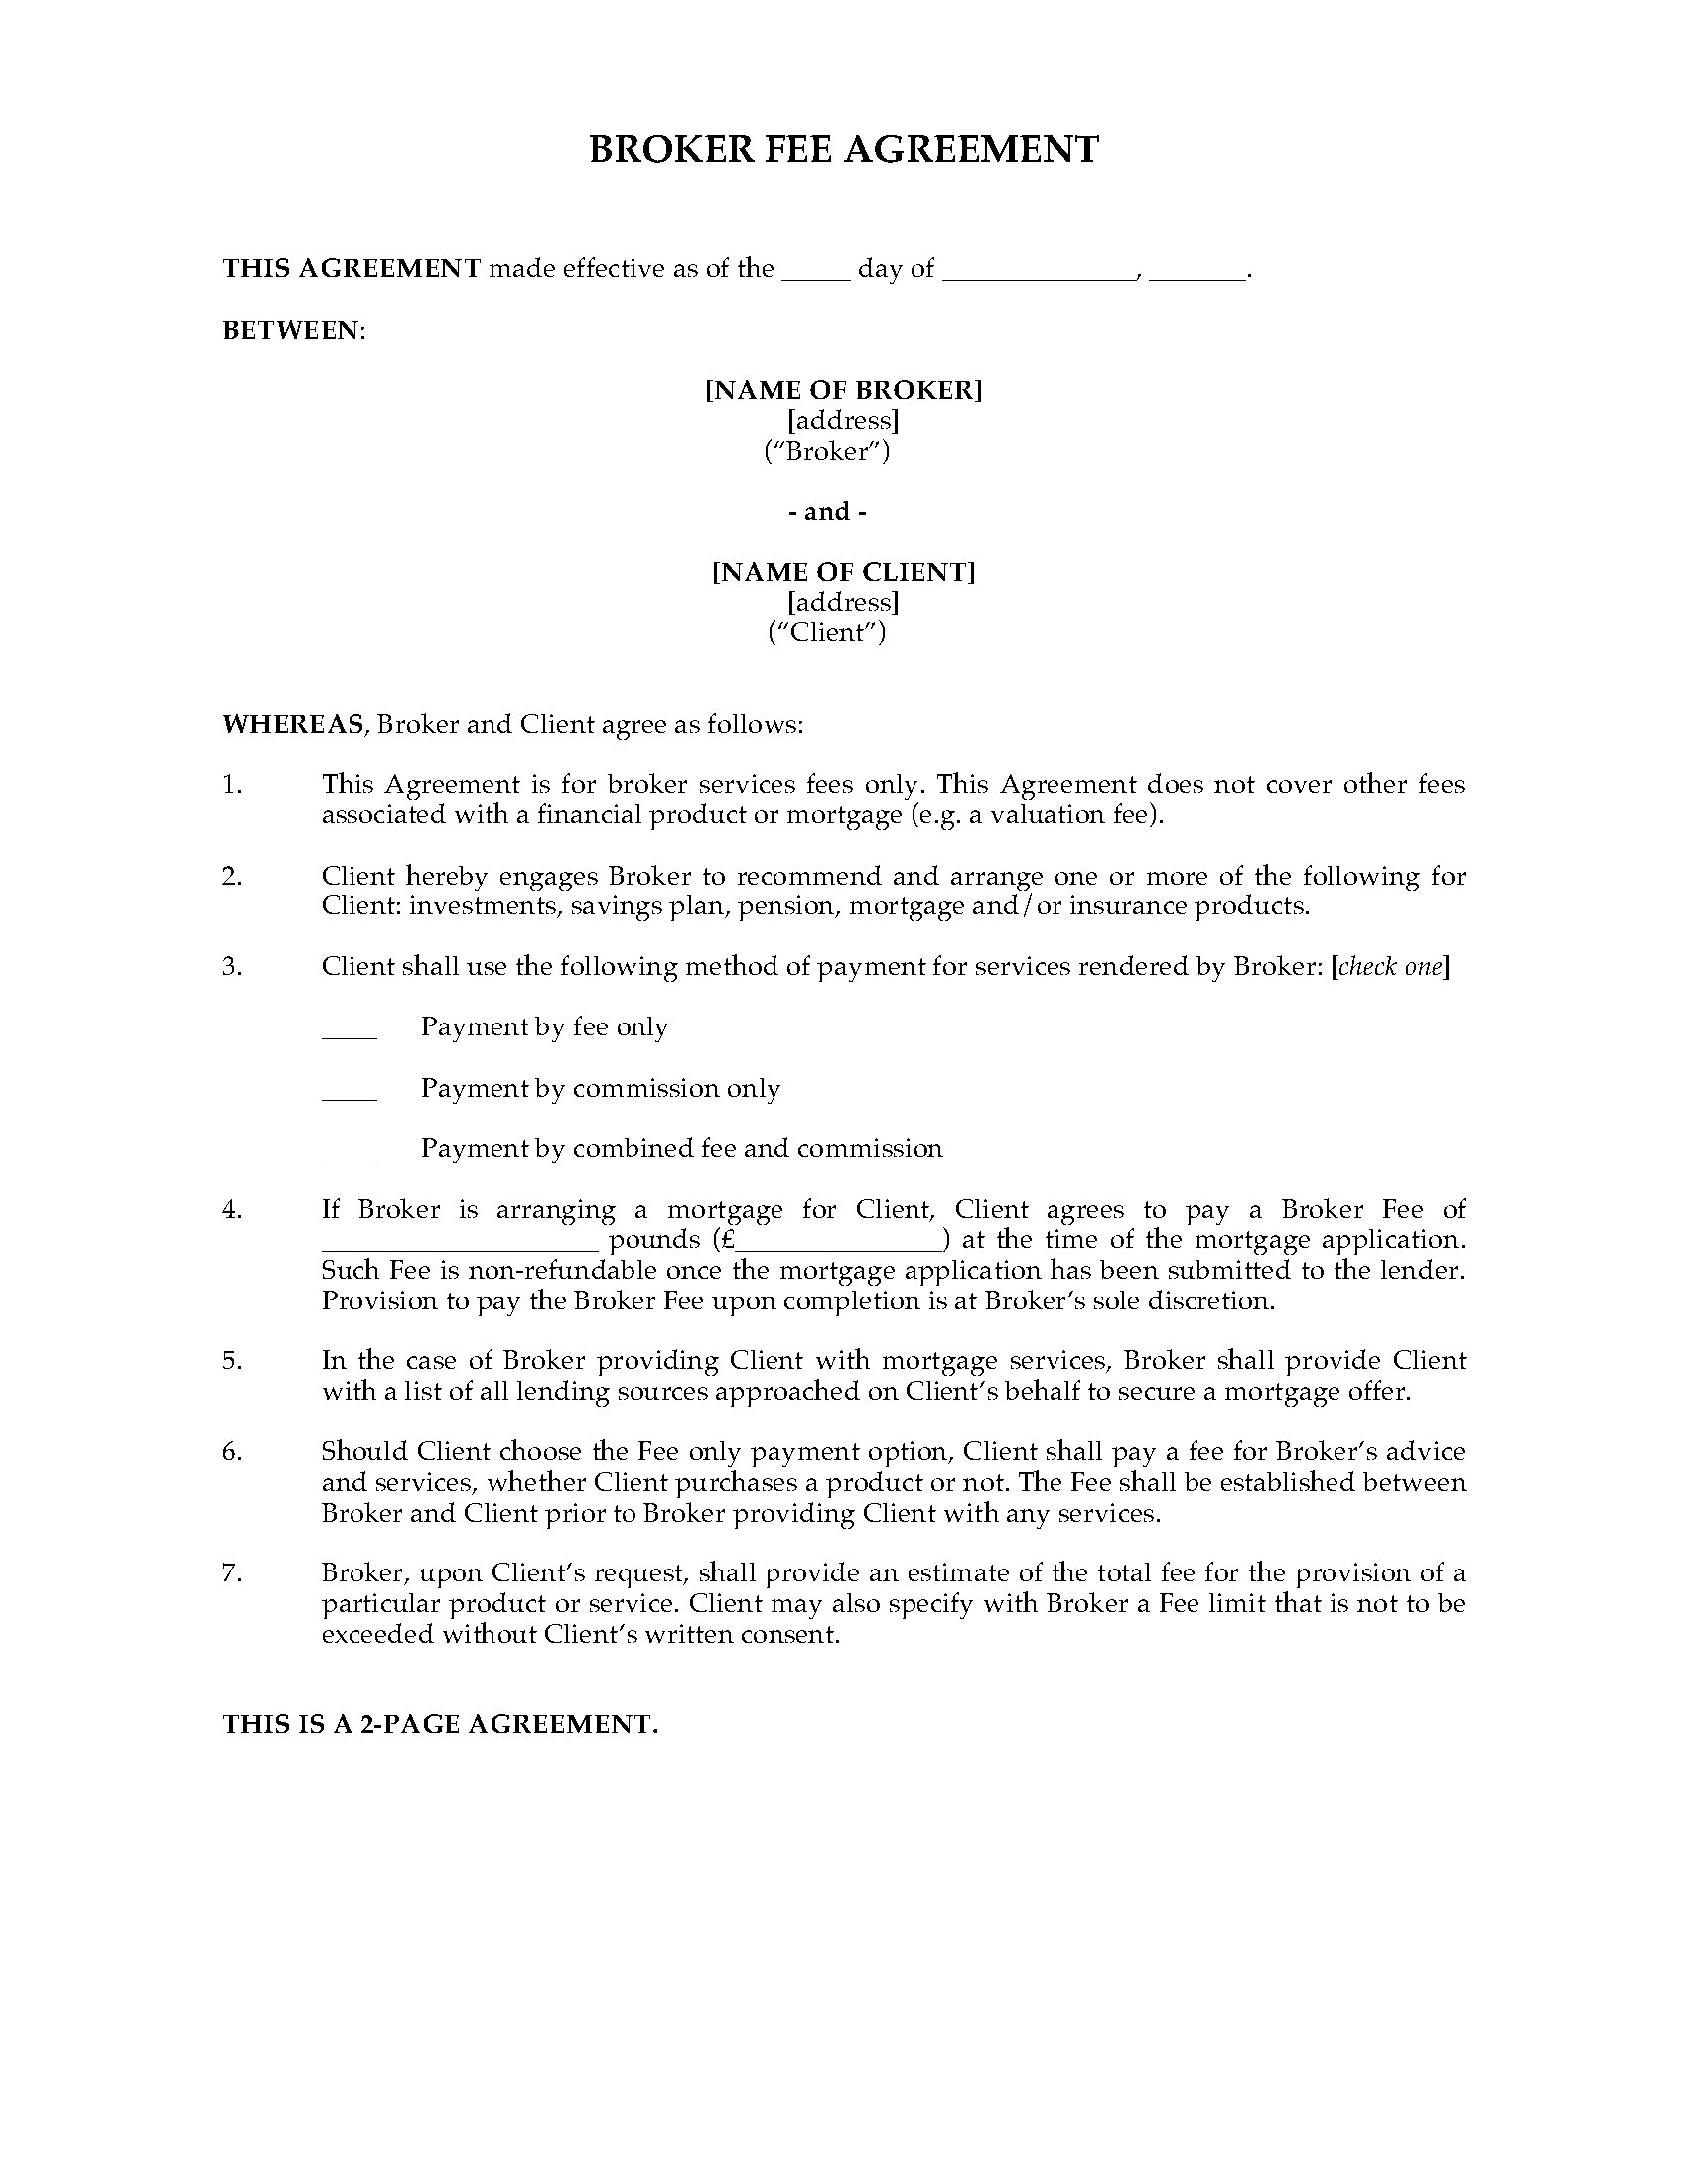 Escrow Agreement Uk Uk Broker Fee Agreement For Financial Services